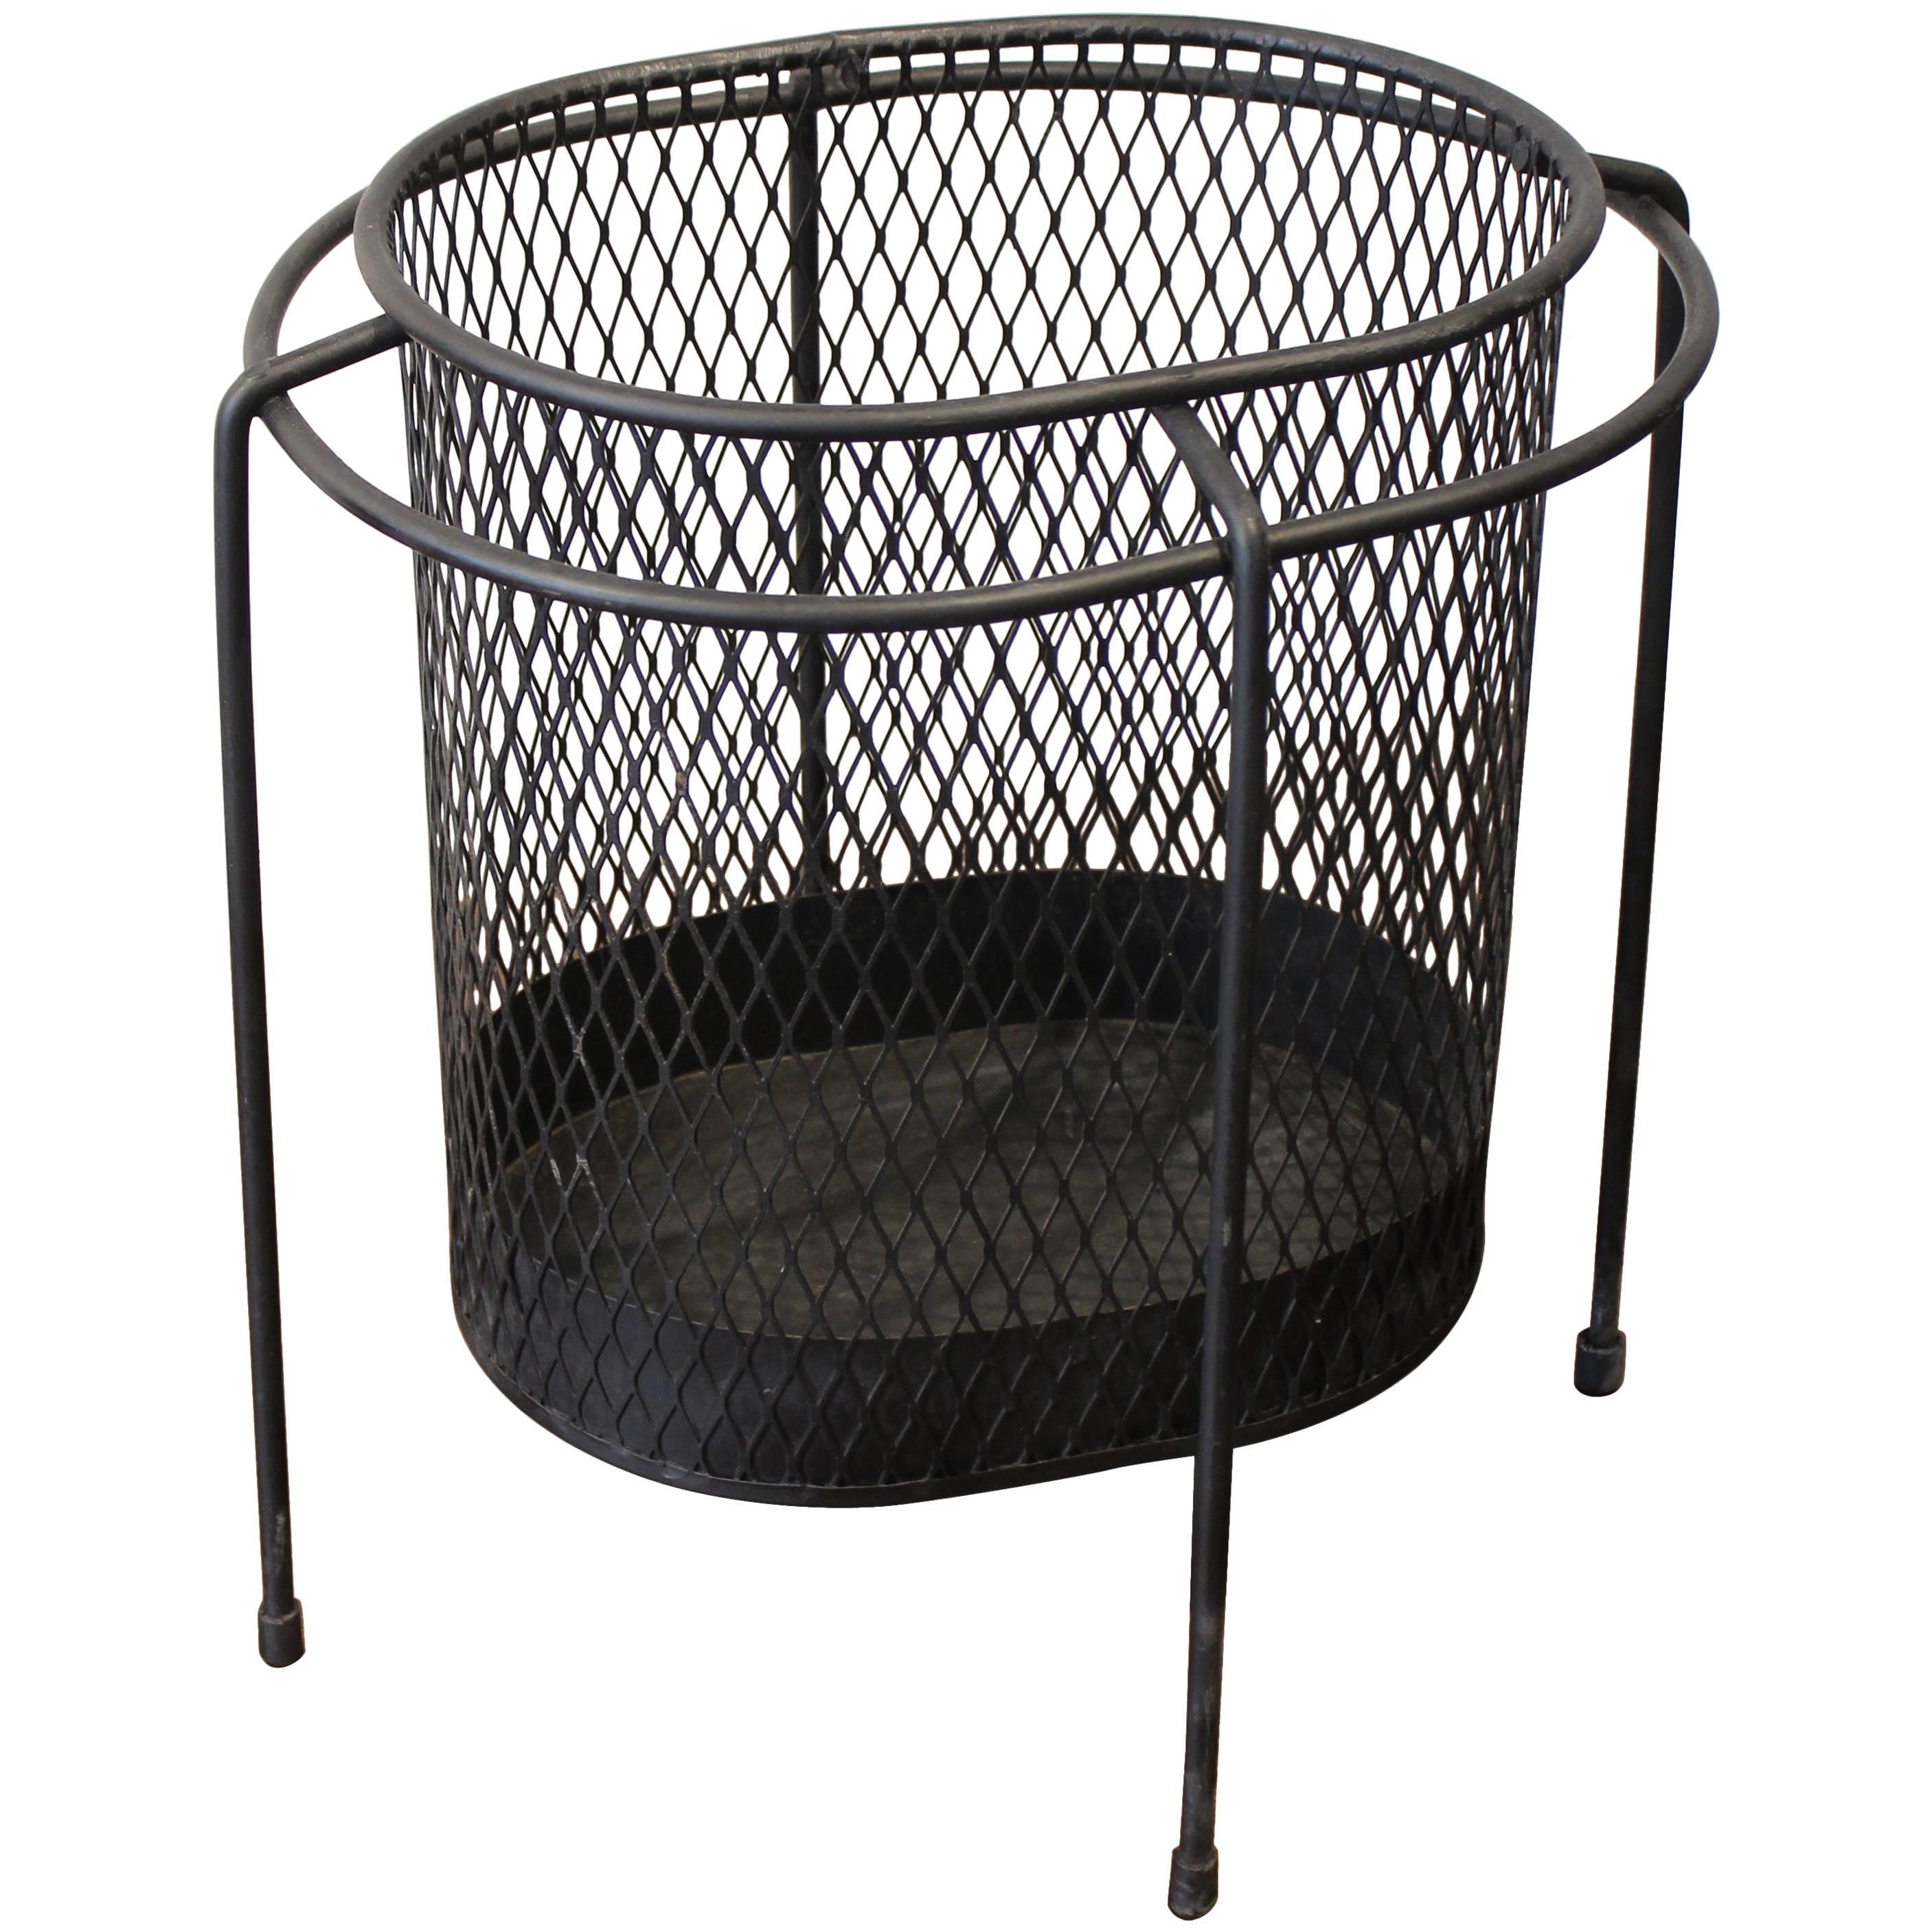 Sculptural Iron and Wire Waste Basket, France, Style of Mategot, 1950s